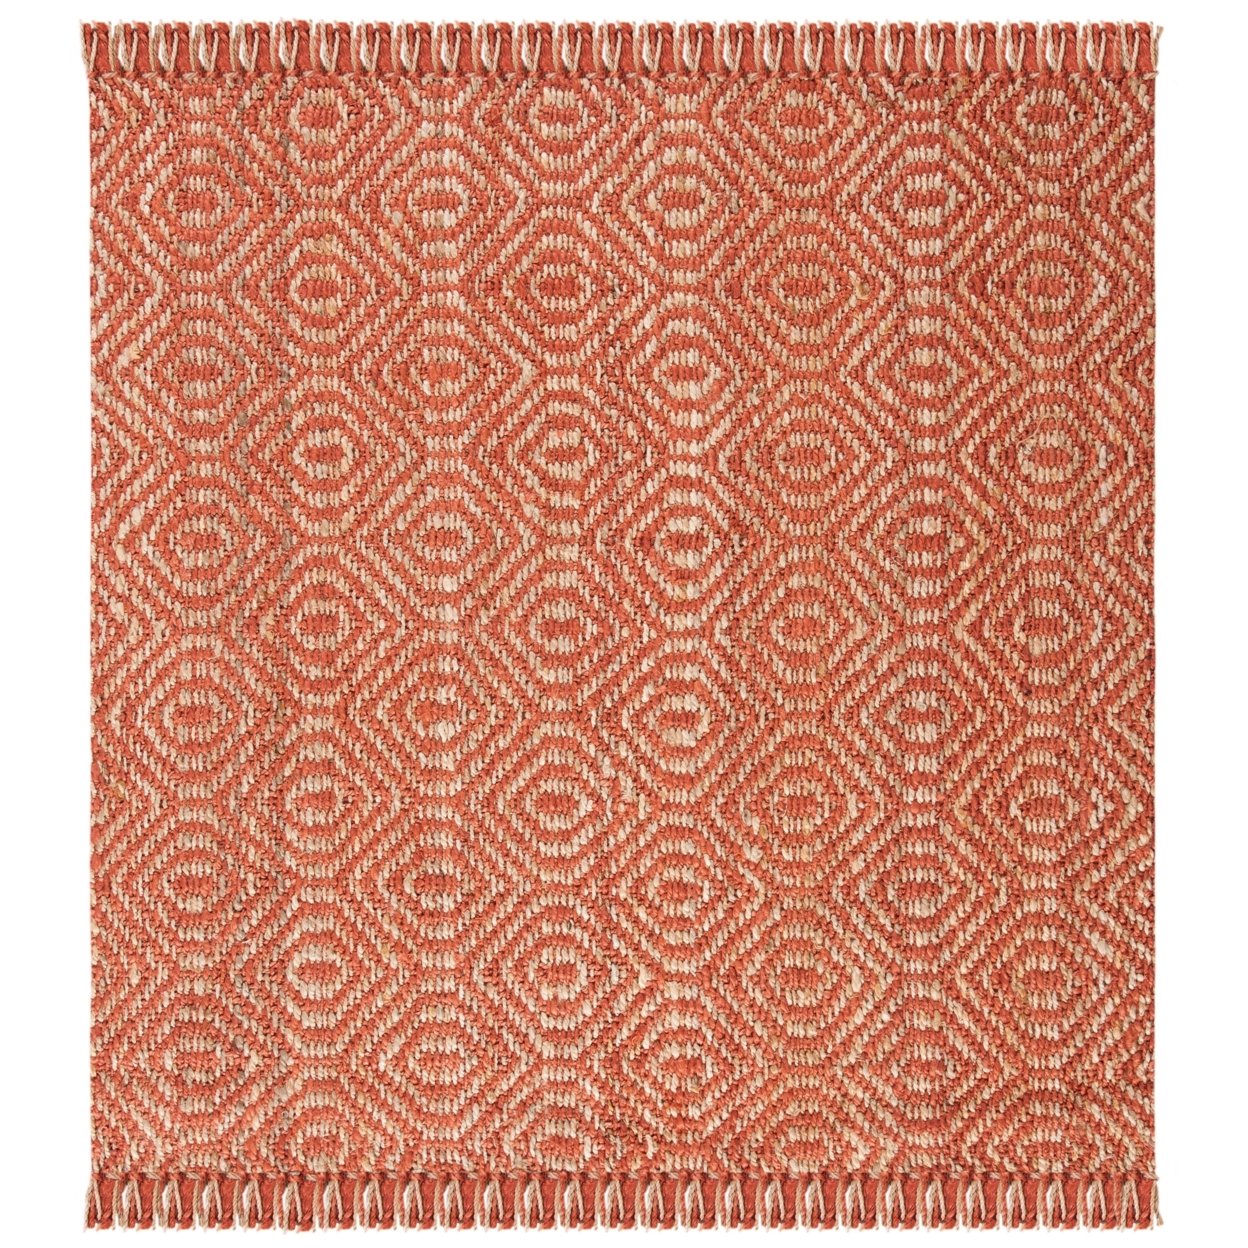 SAFAVIEH Natural Fiber NF445A Handwoven Rust Rug - 6' Square